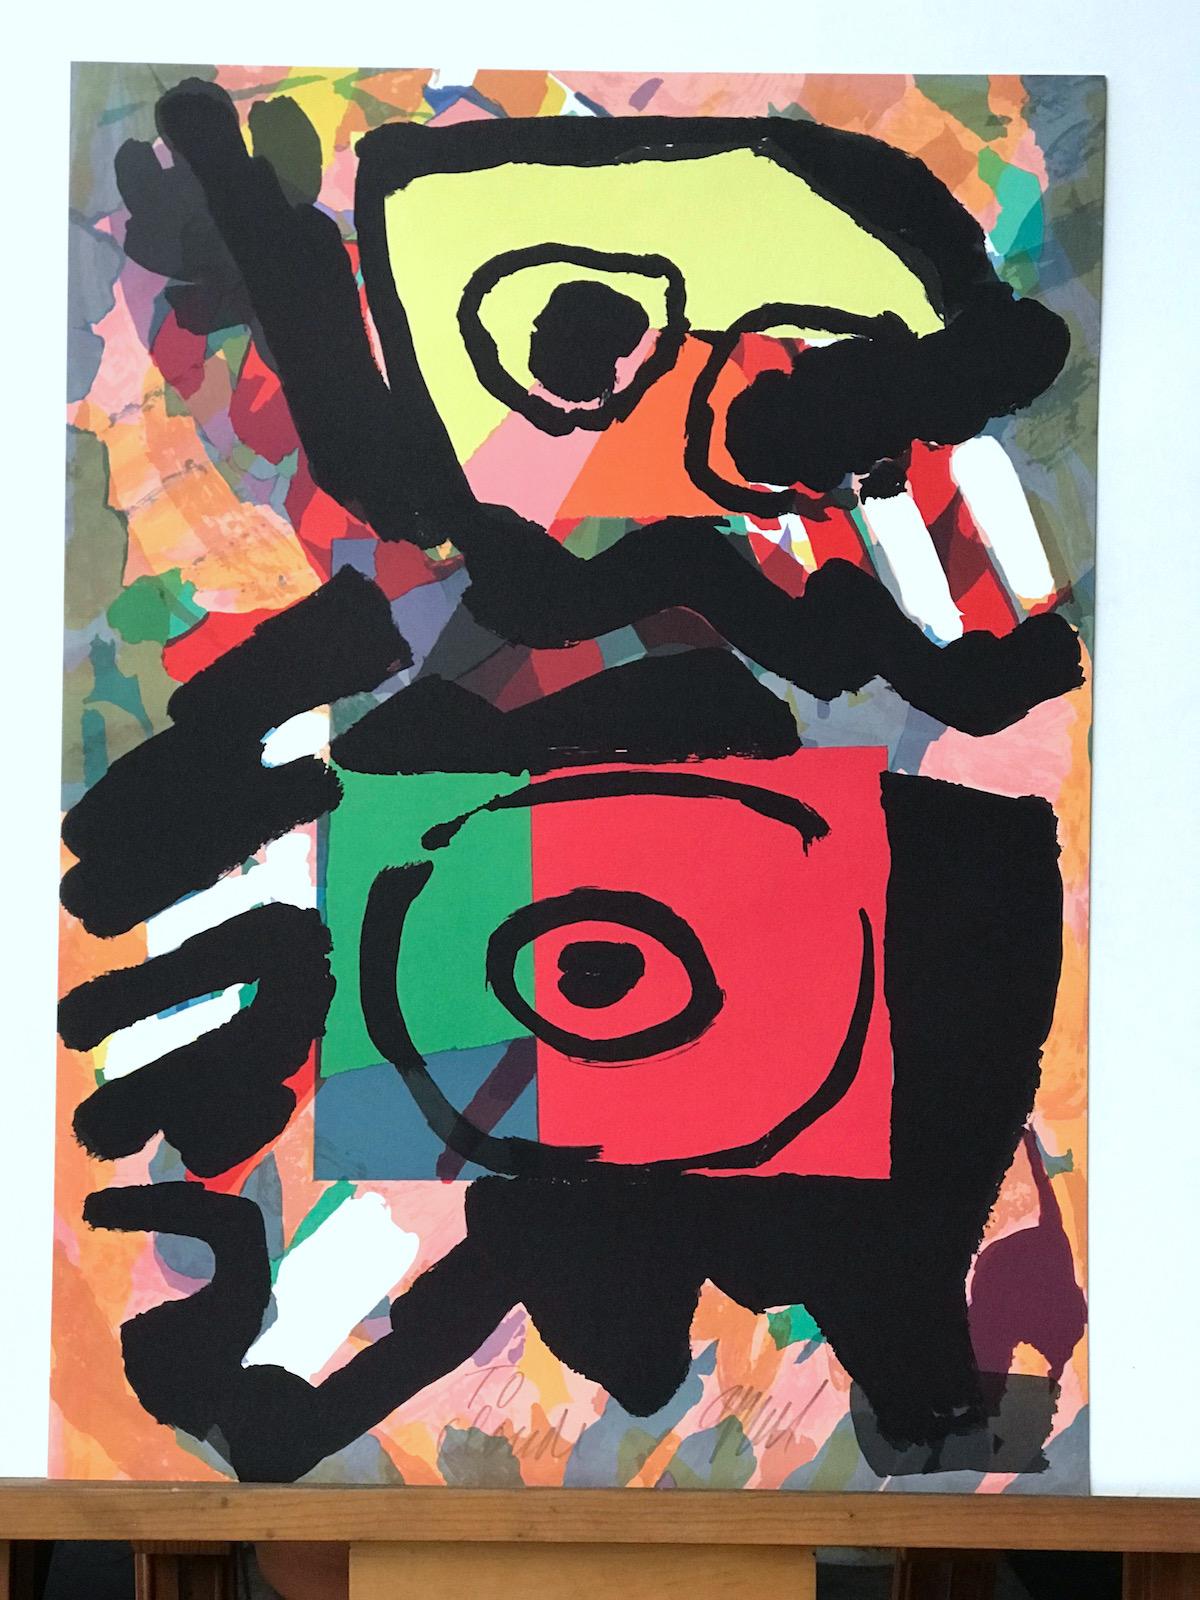 MULTI PERSONAGE Signed Lithograph, Abstract Collage Portrait, CoBrA Artist - Black Abstract Print by Karel Appel